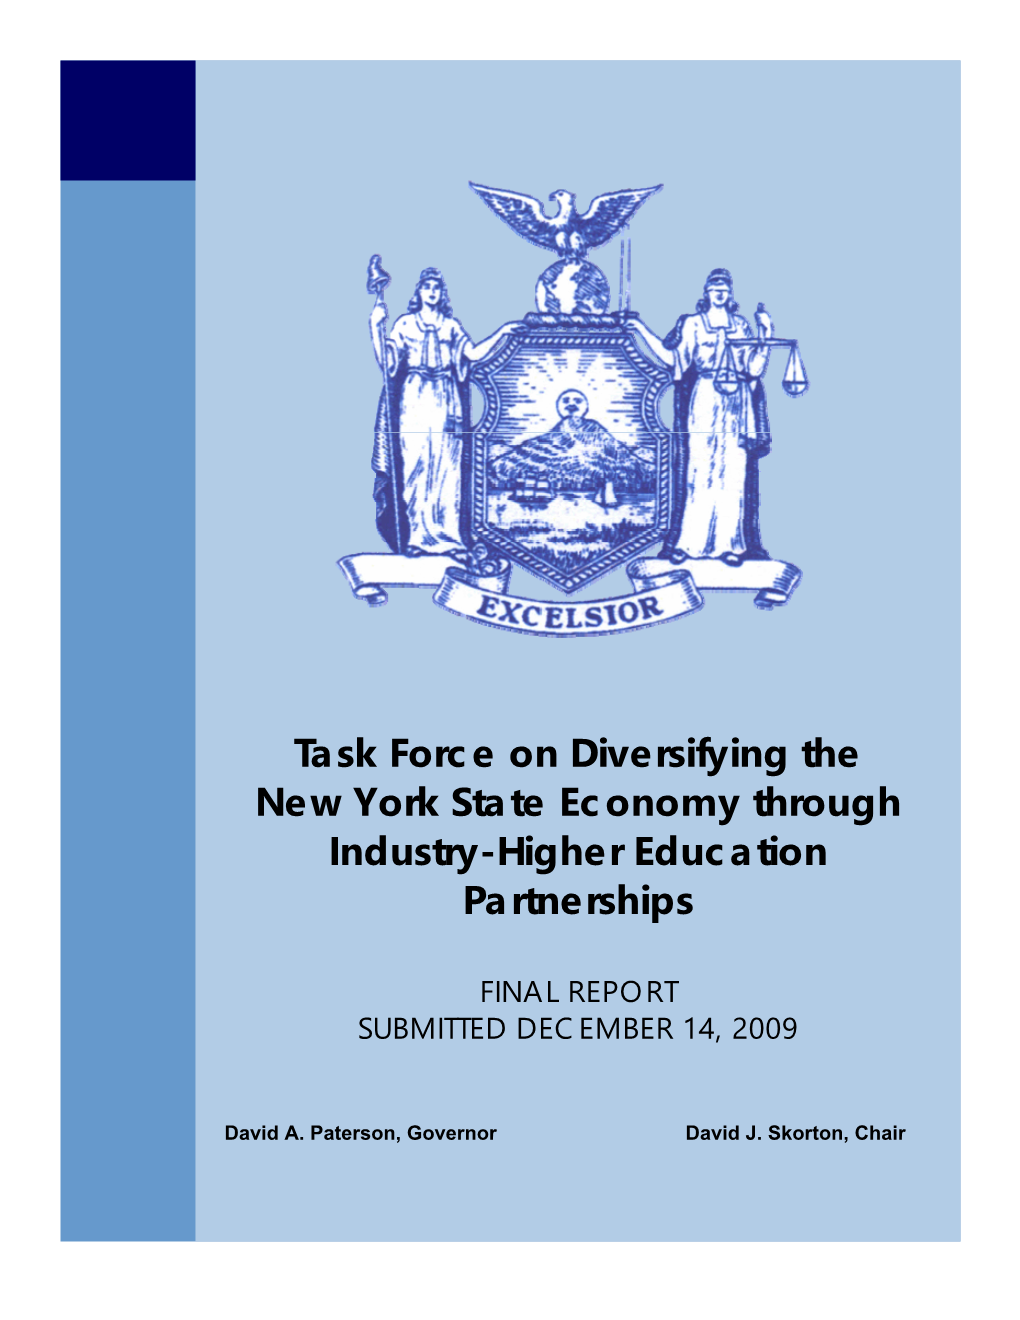 Task Force on Diversifying the New York State Economy Through Industry- Higher Education Partnerships, I Herewith Submit This Report of Findings and Recommendations